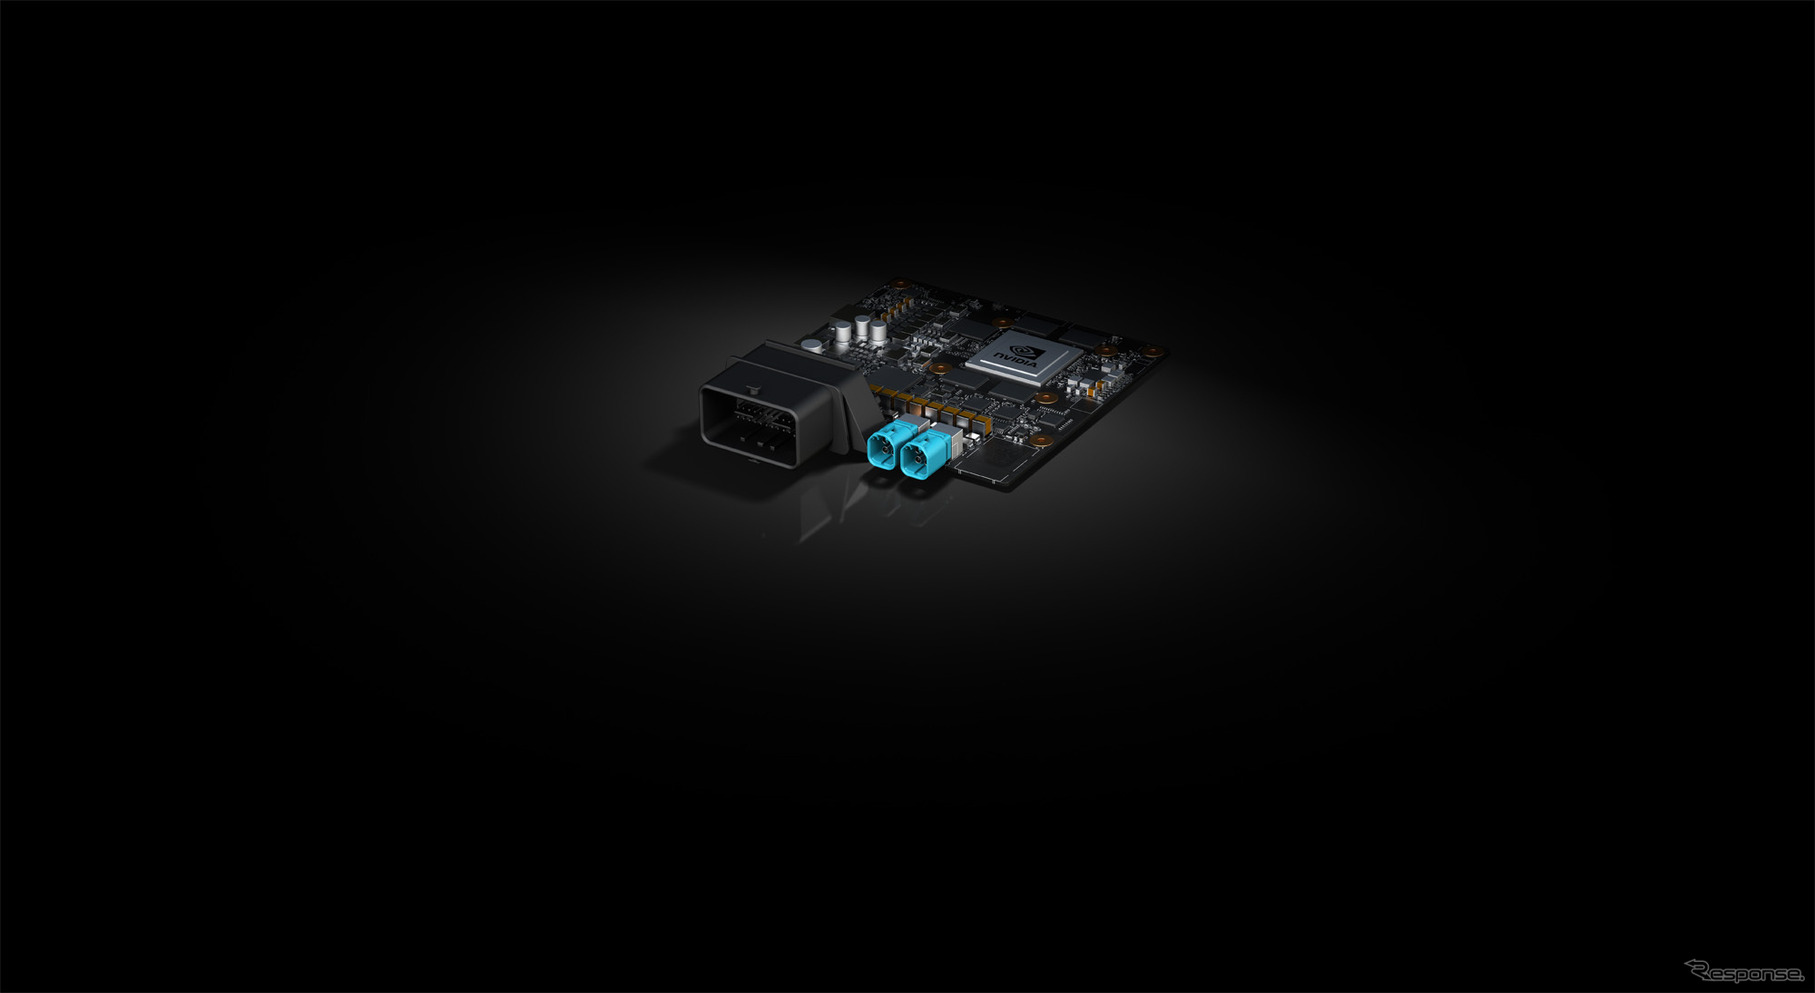 DRIVE PX 2 Autocruise product render